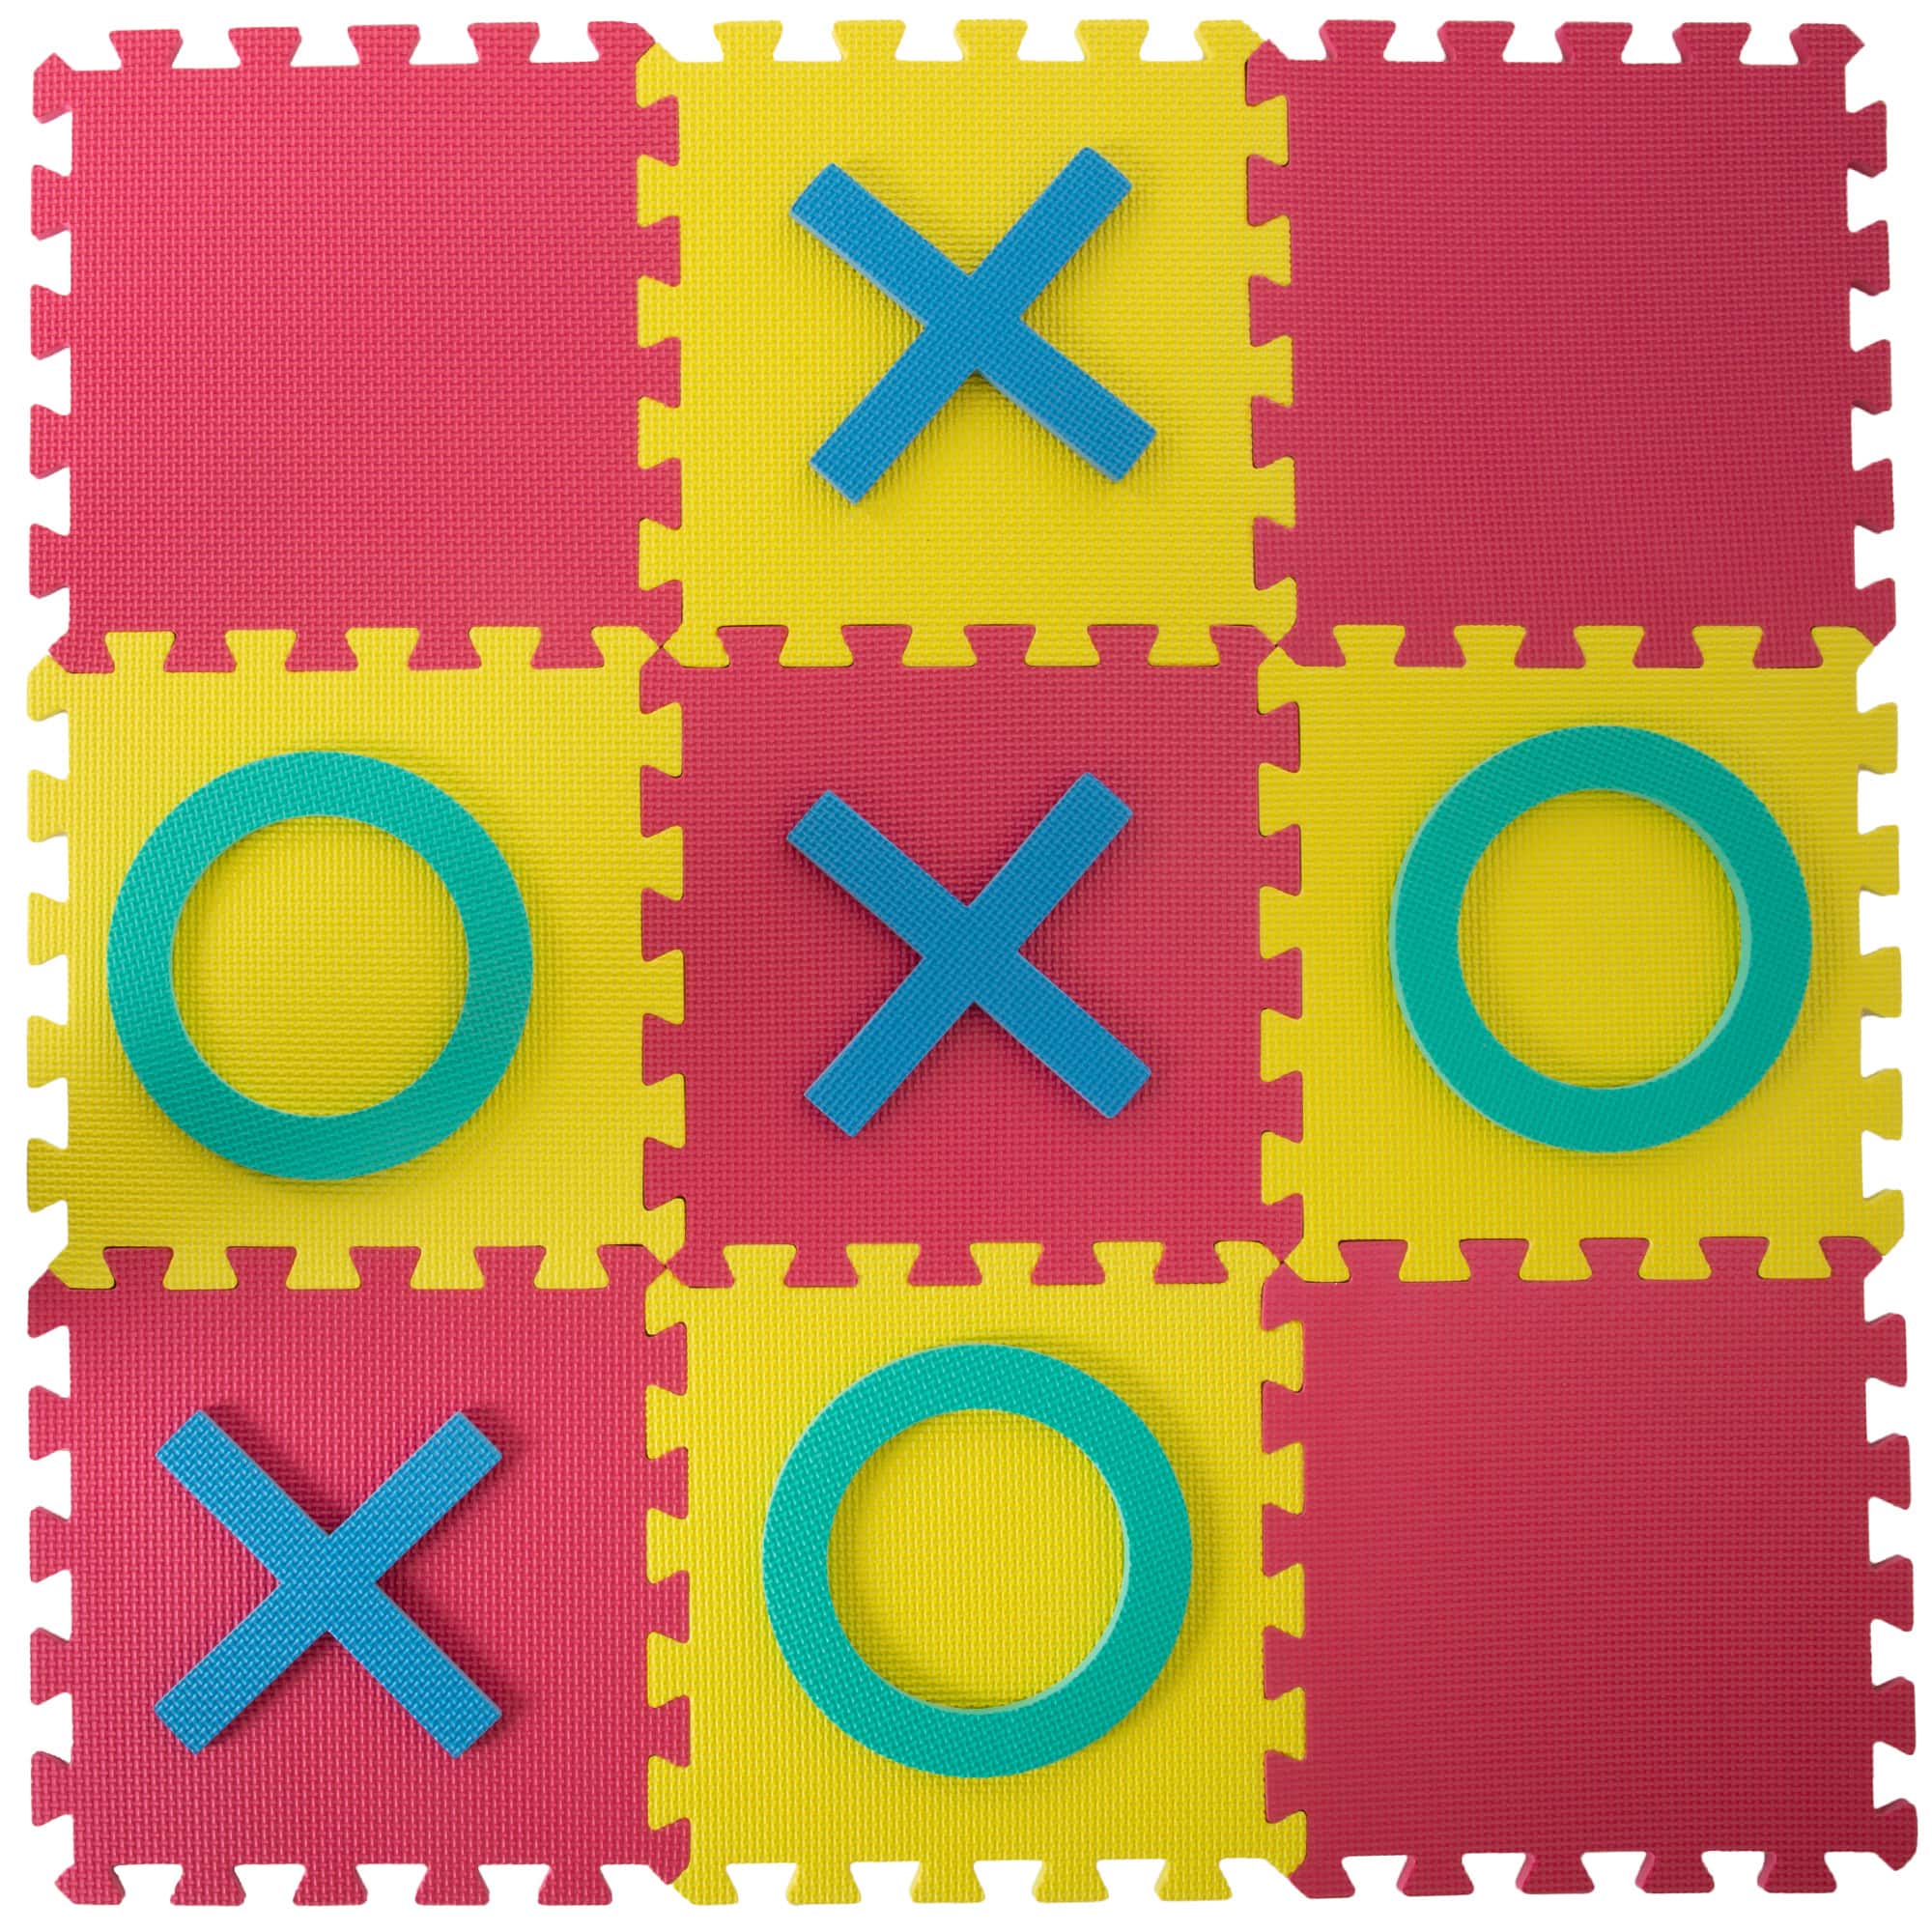 Toy Time Giant Classic Tic Tac Toe Game